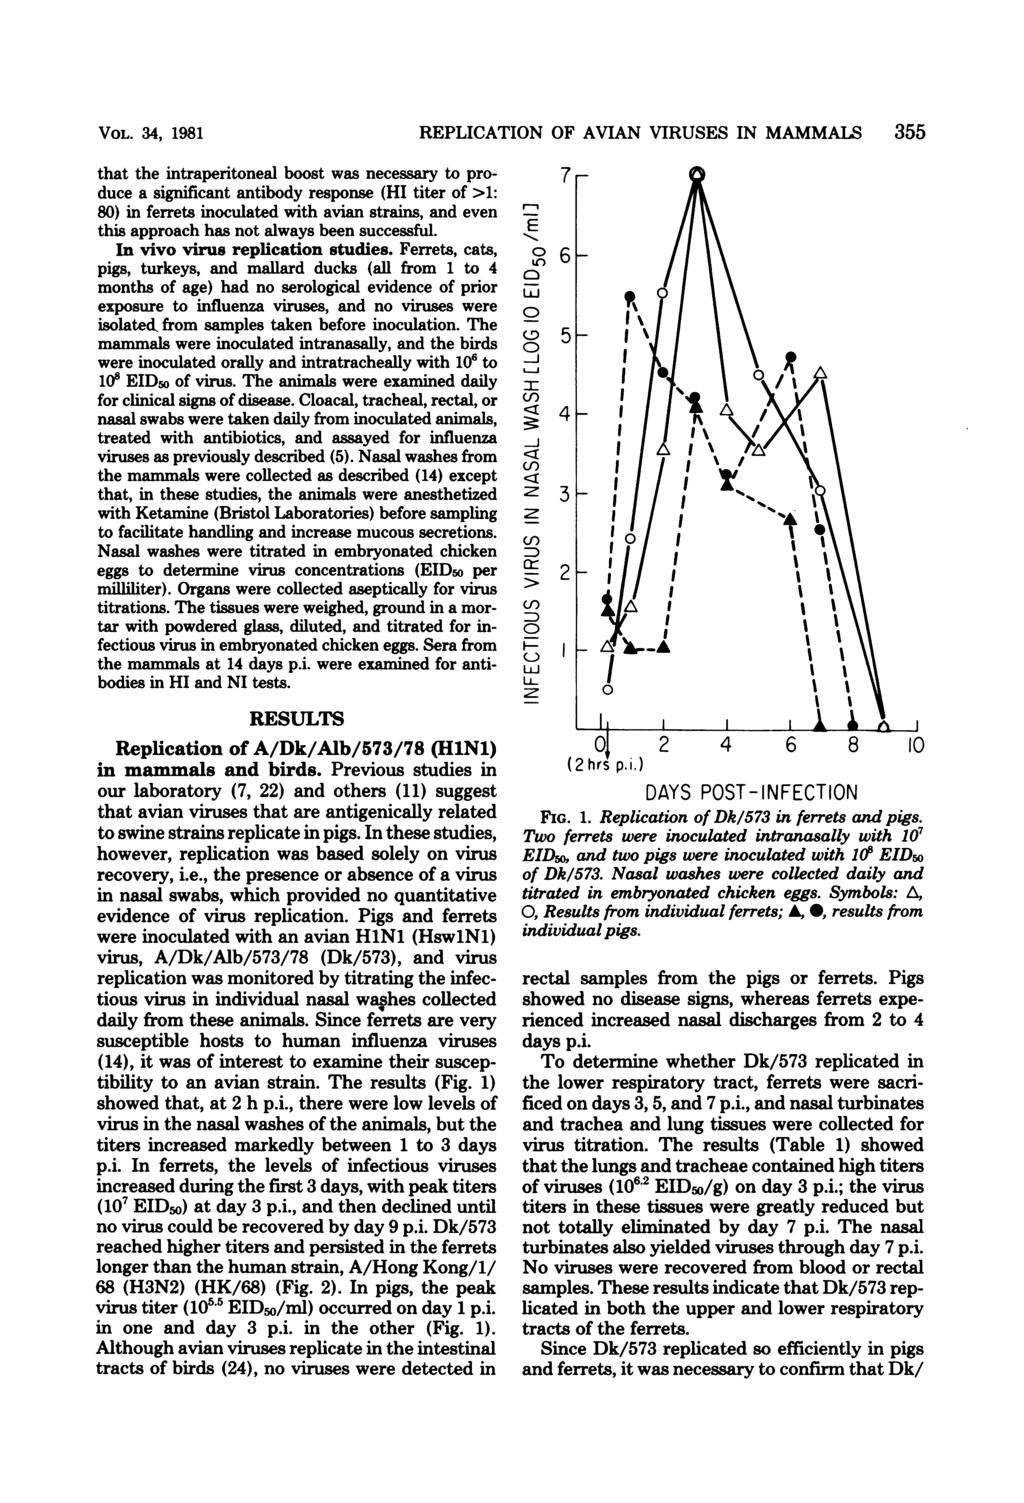 VOL. 34, 1981 that the intraperitoneal boost was necessary to produce a significant antibody response (HI titer of >1: 80) in ferrets inoculated with avian strains, and even this approach has not